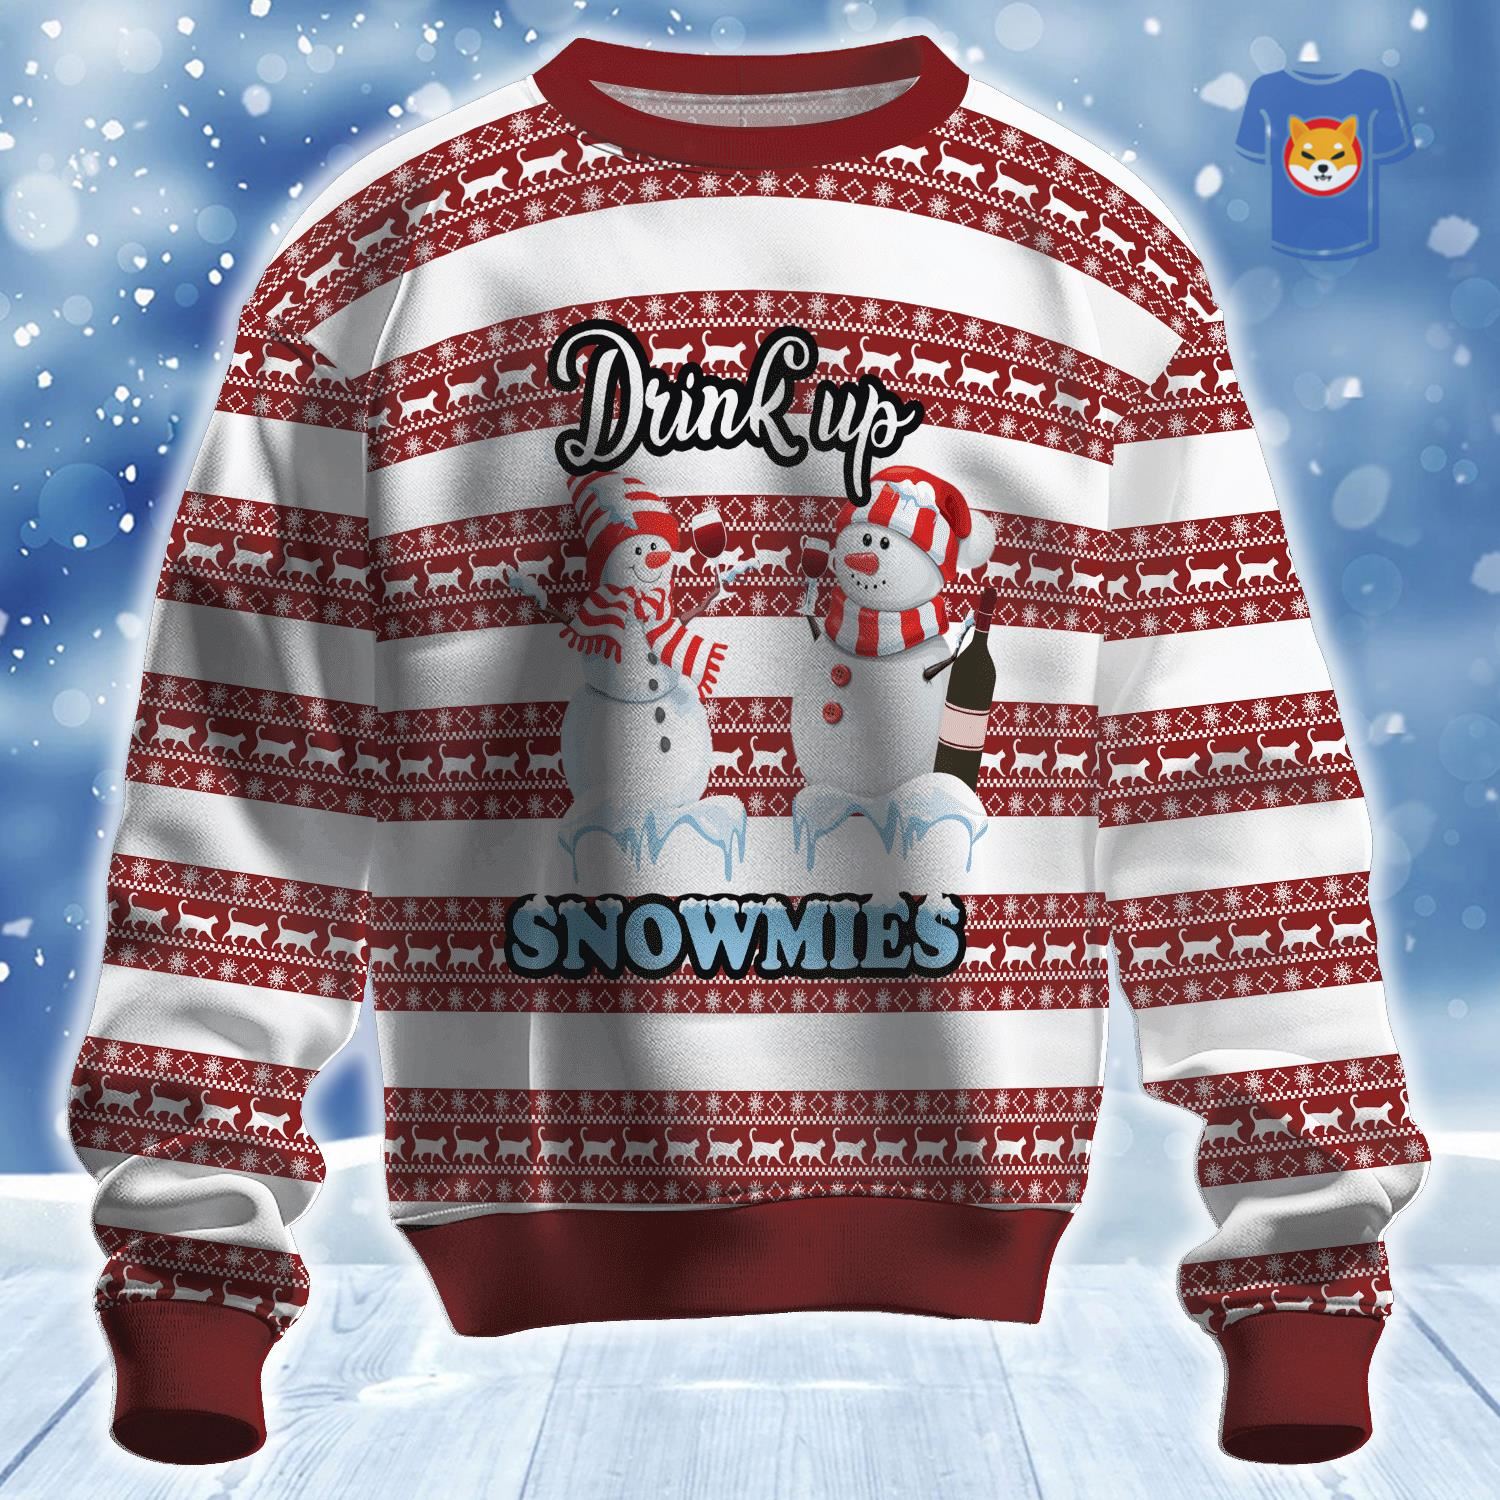 Drink Up Snowmies Ugly Christmas Sweater 